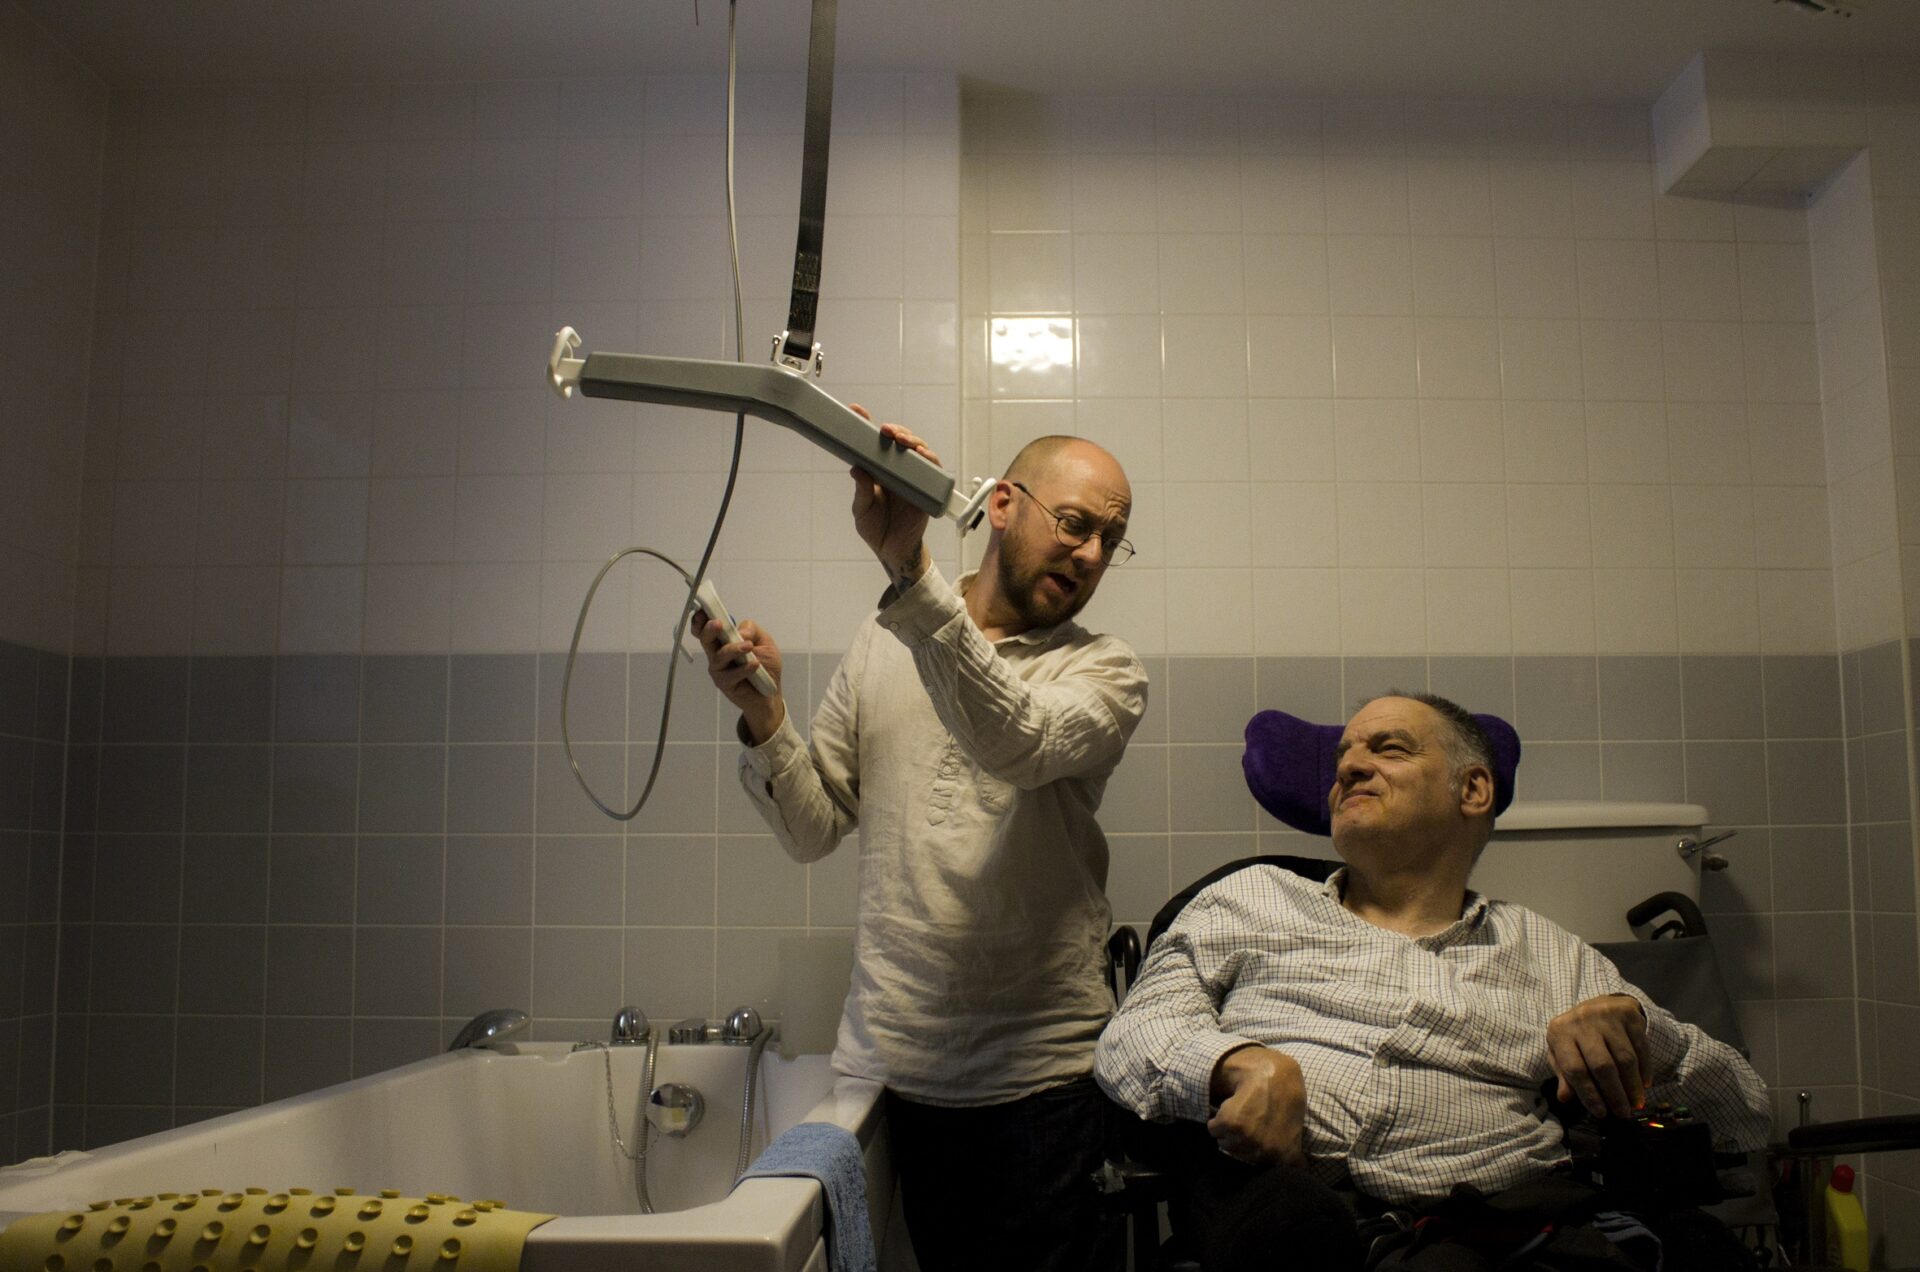 A white man is holding adapted bathroom equipment whilst a white client in a wheelchair watches him. The lighting is low and atmospheric.